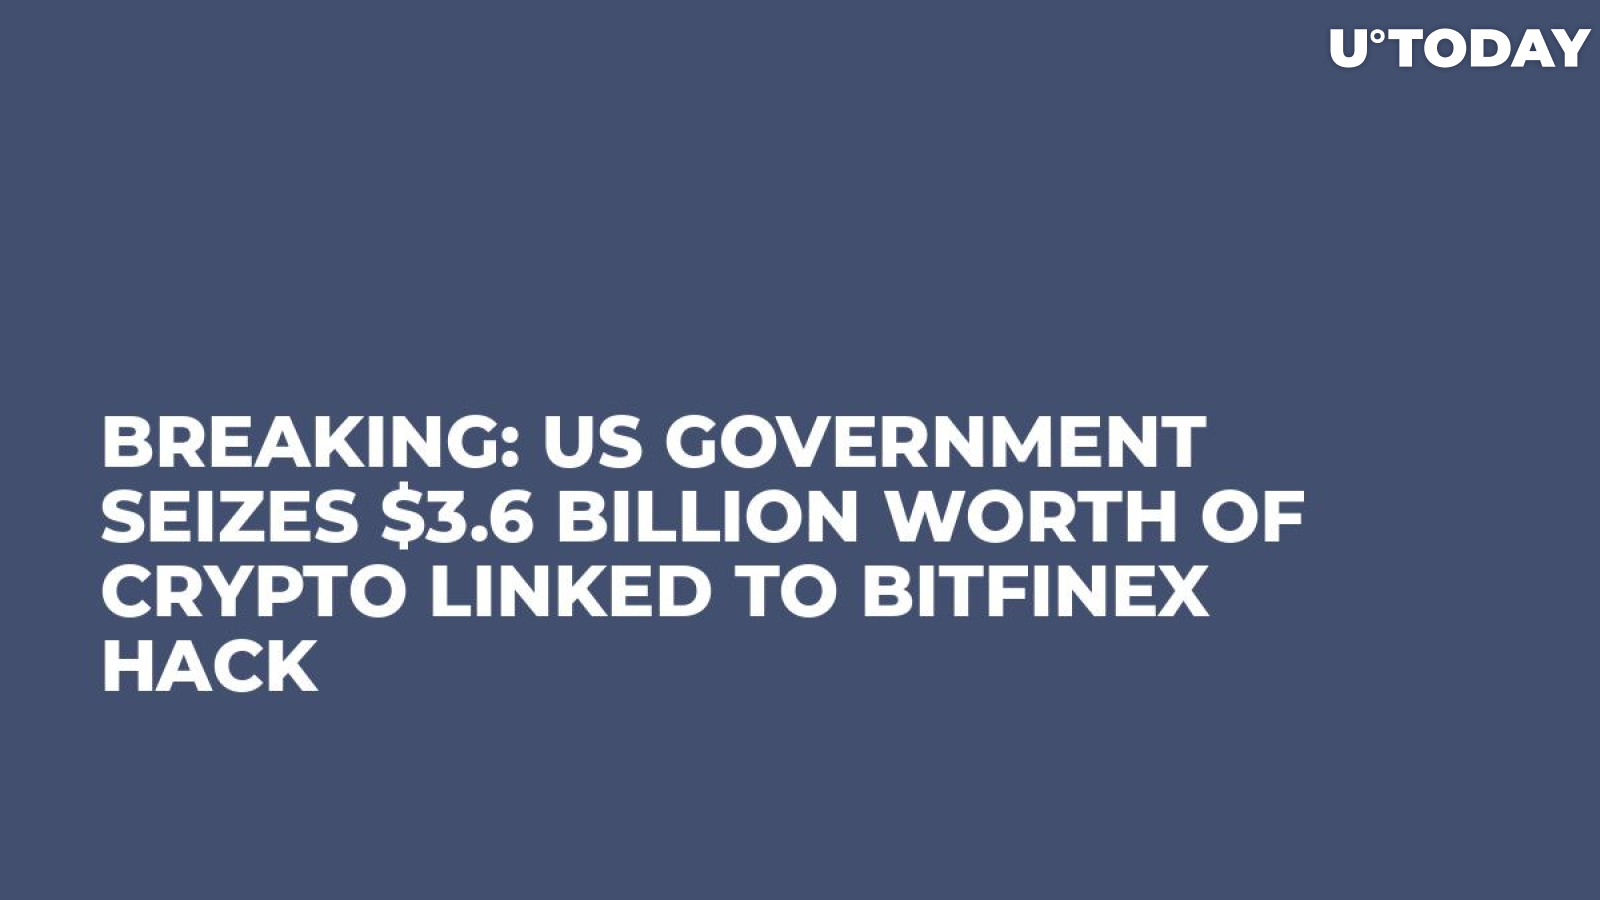 BREAKING: US Government Seizes $3.6 Billion Worth of Crypto Linked to Bitfinex Hack